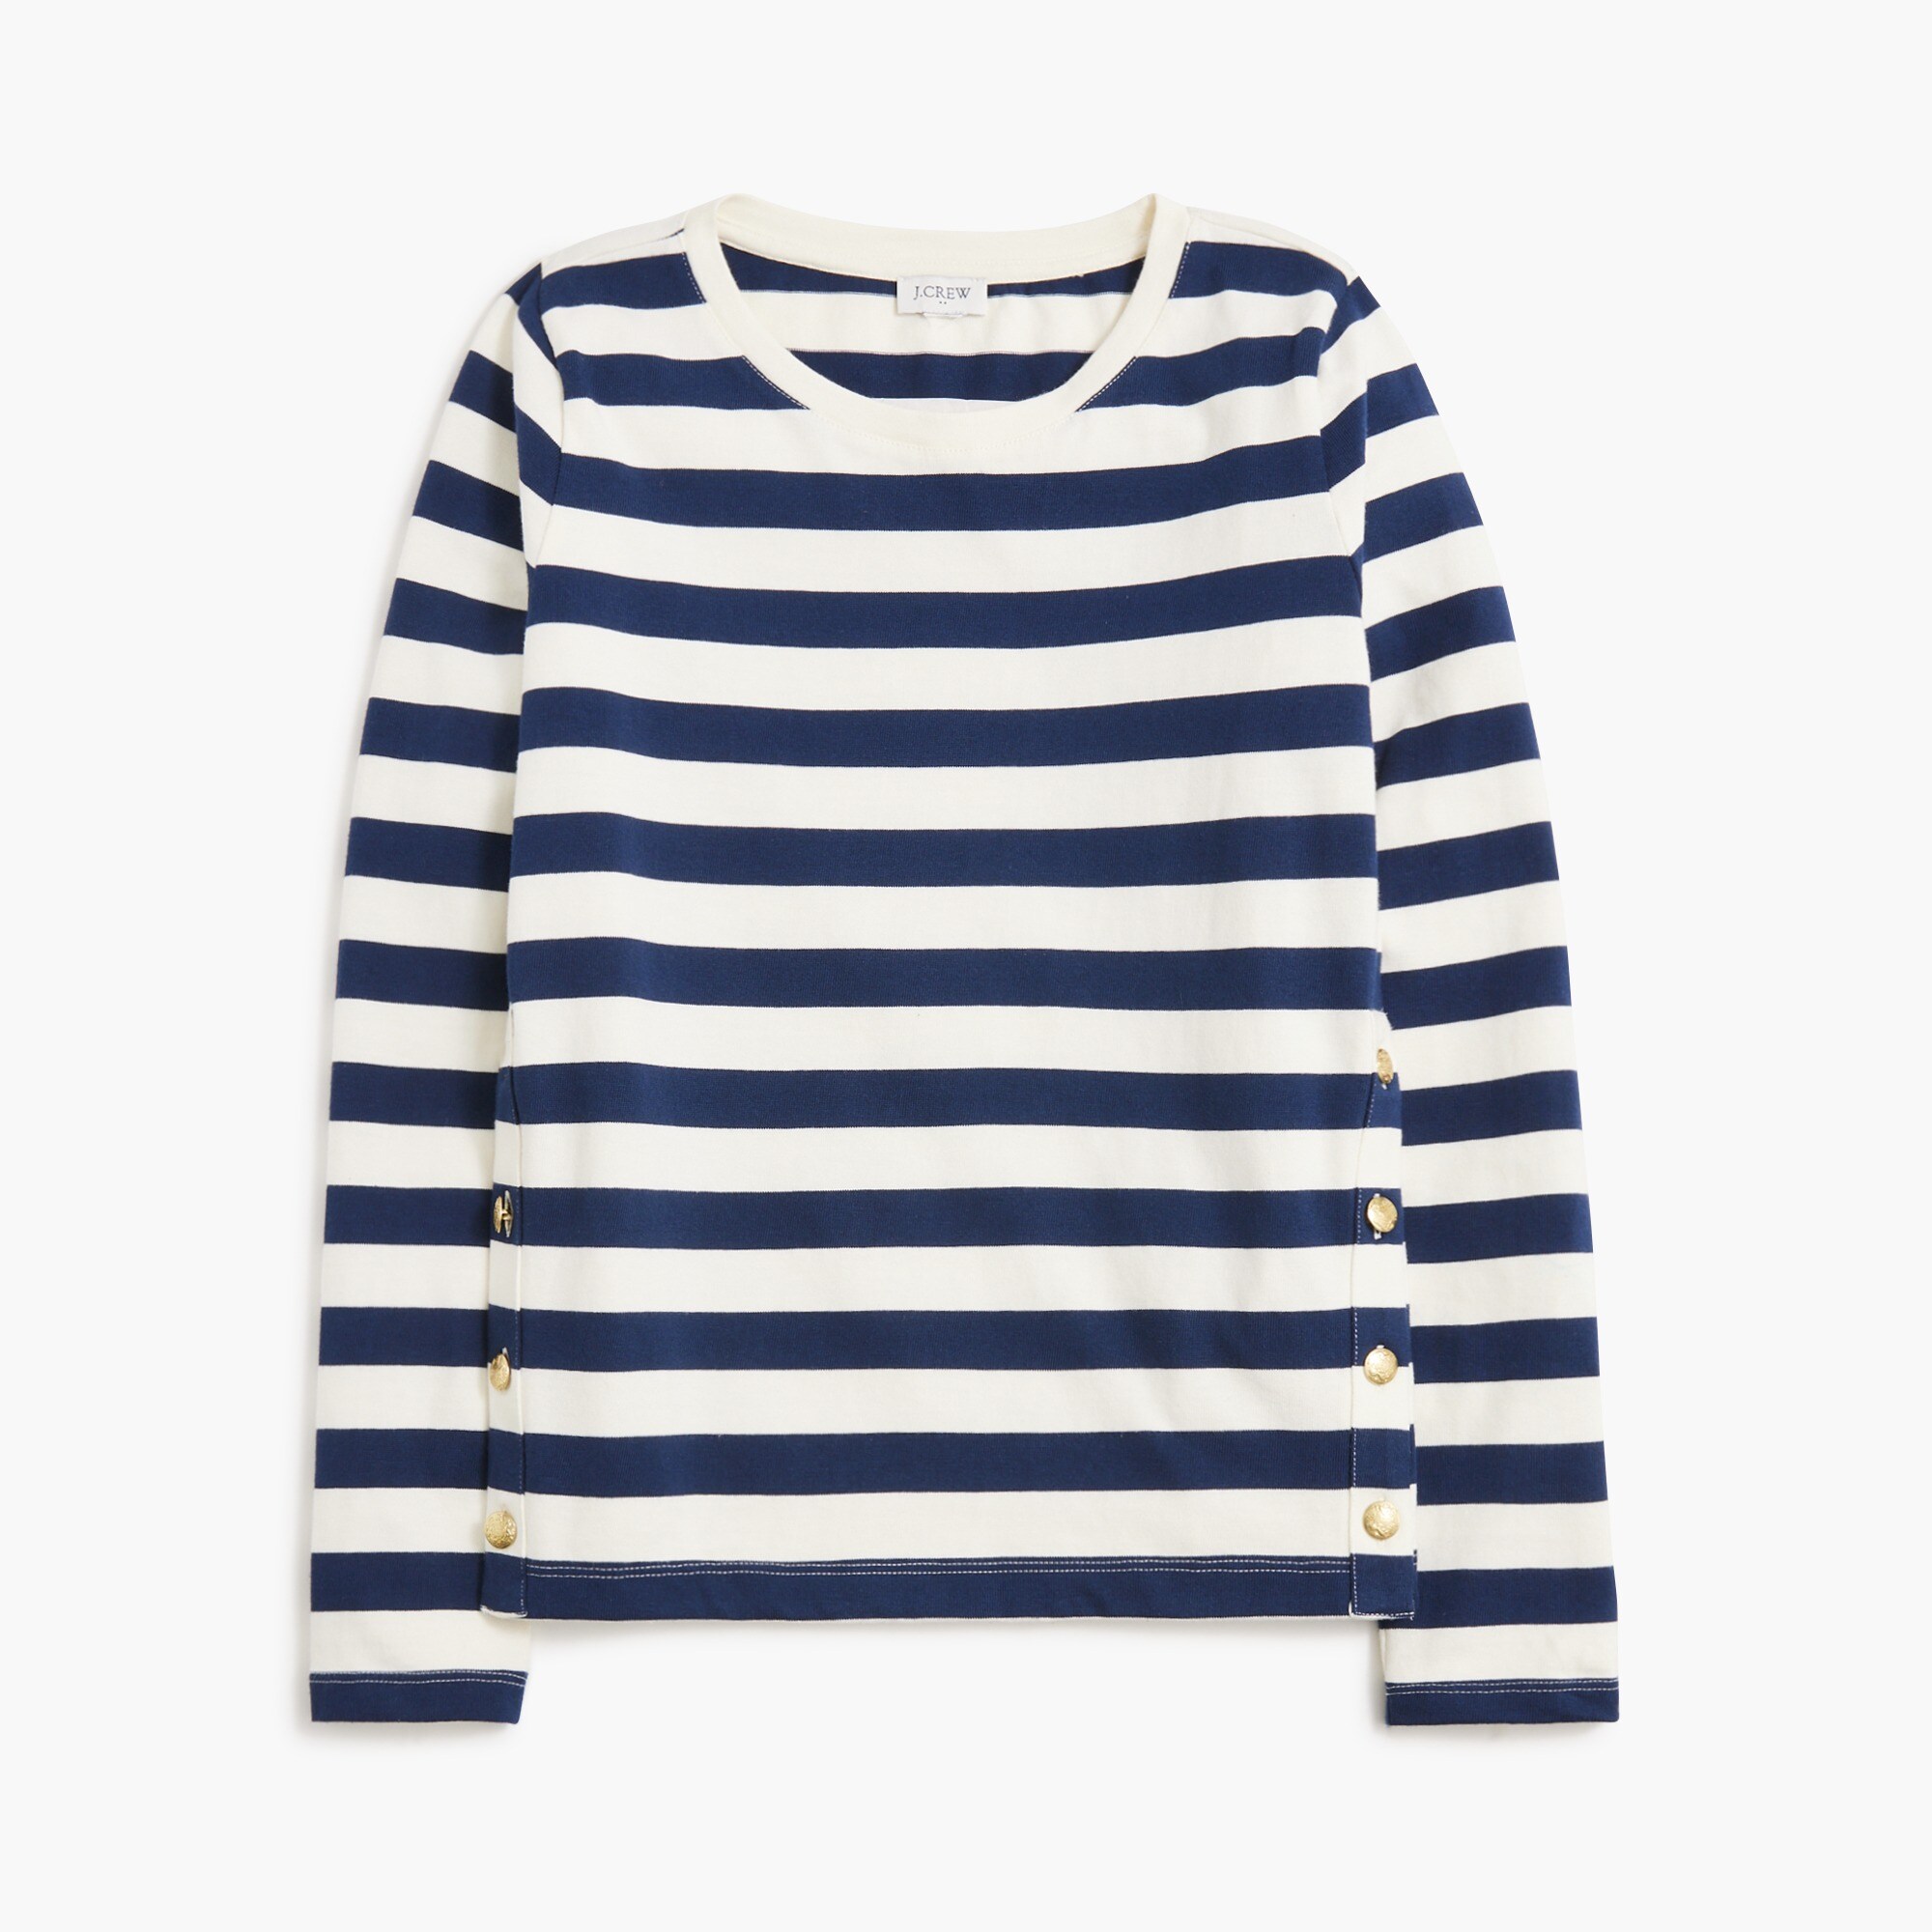  Striped button-side tee